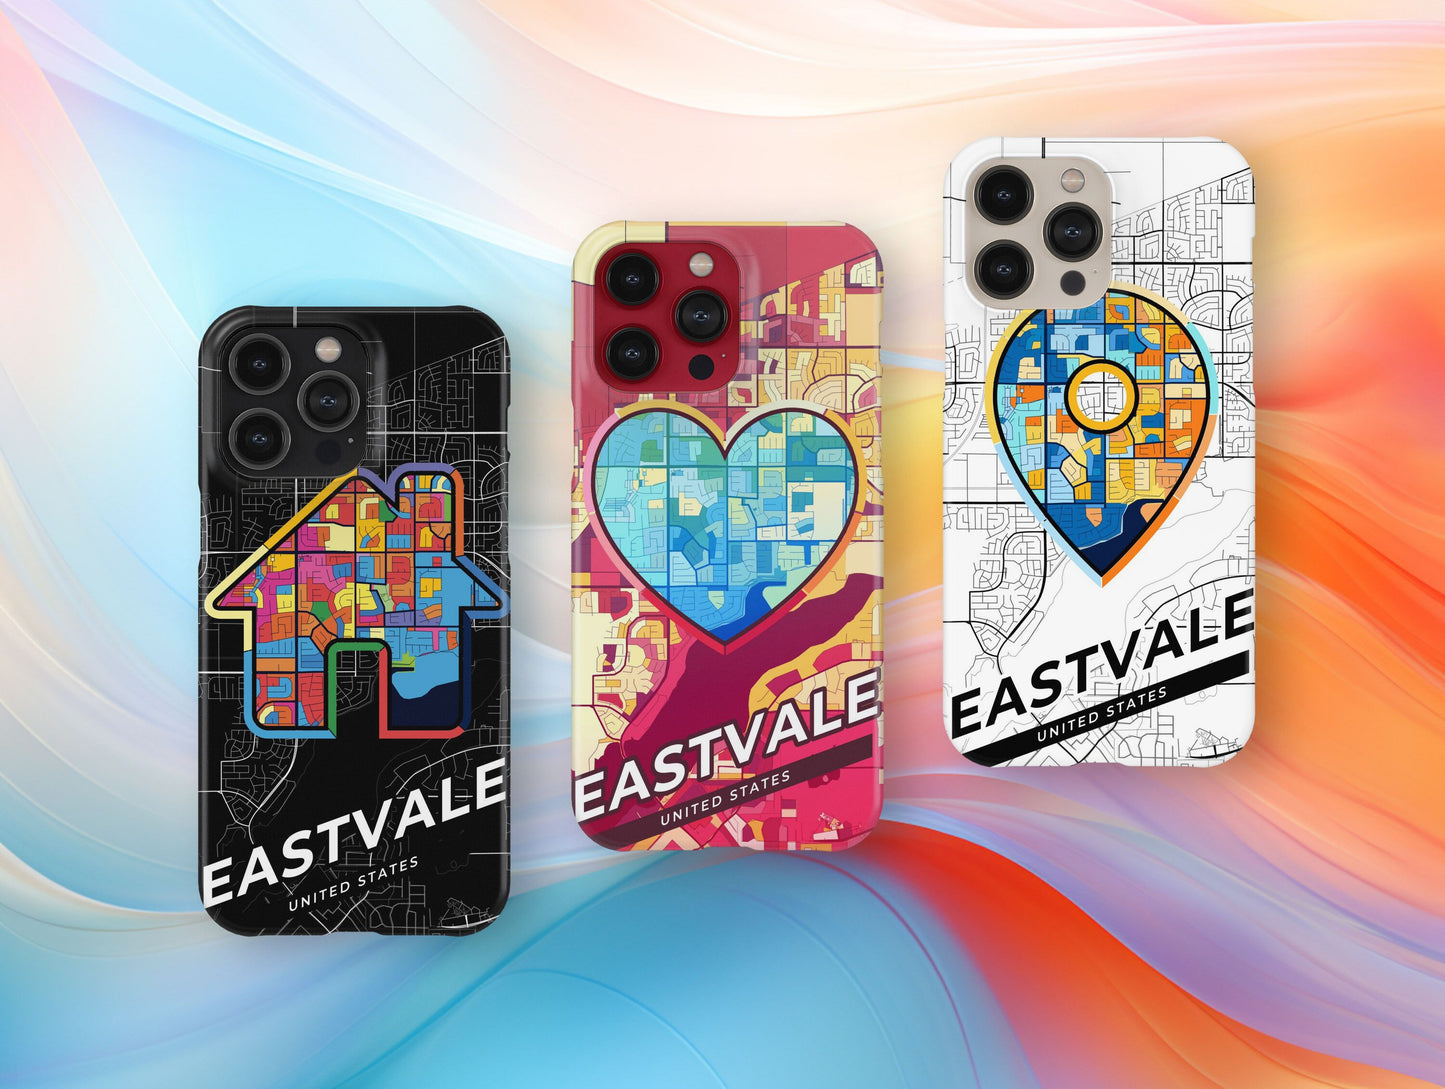 Eastvale California slim phone case with colorful icon. Birthday, wedding or housewarming gift. Couple match cases.